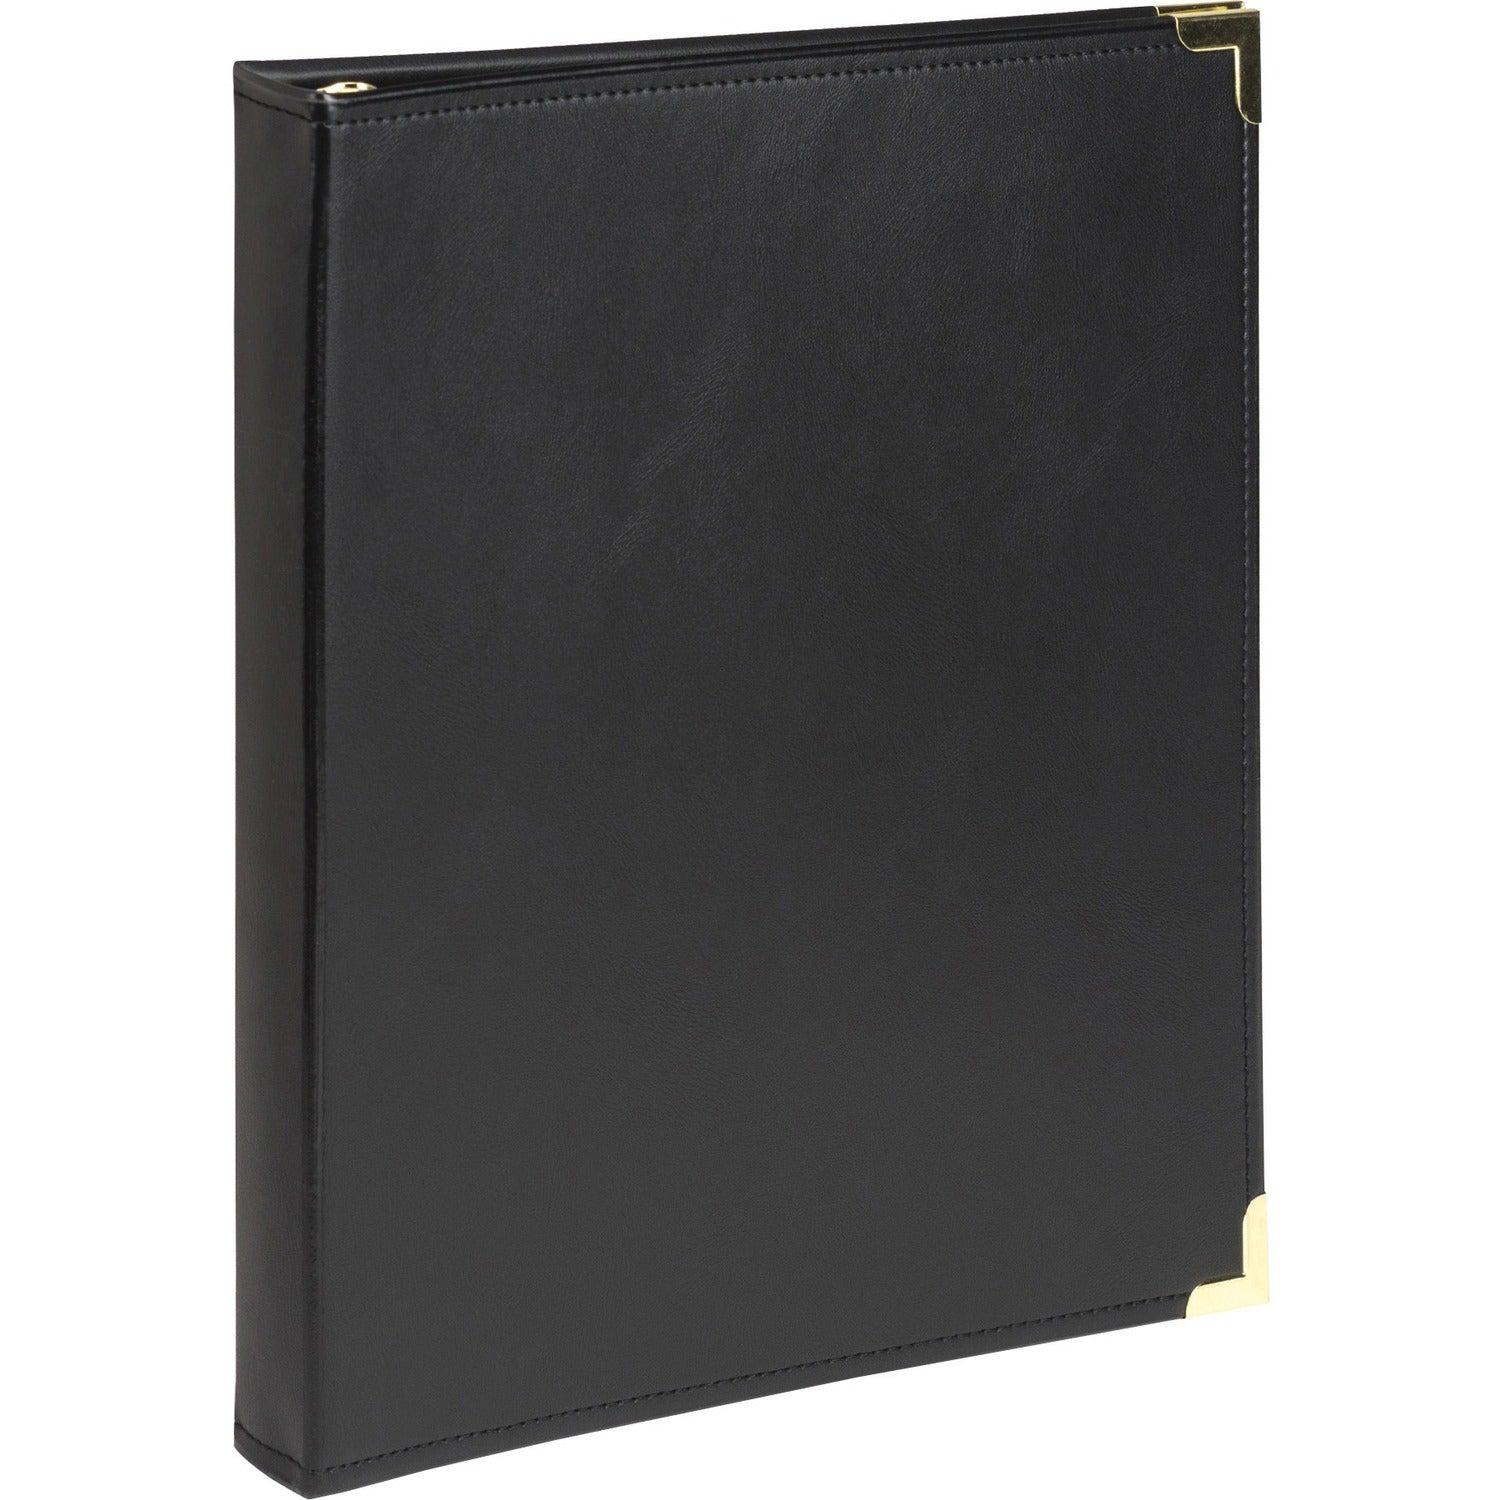 samsill-classic-collection-executive-presentation-binder-1-2-binder-capacity-letter-8-1-2-x-11-sheet-size-100-sheet-capacity-3-x-round-ring-fasteners-2-internal-pockets-vinyl-synthetic-leather-brass-black-116-lb-rigid-s_sam15110 - 1